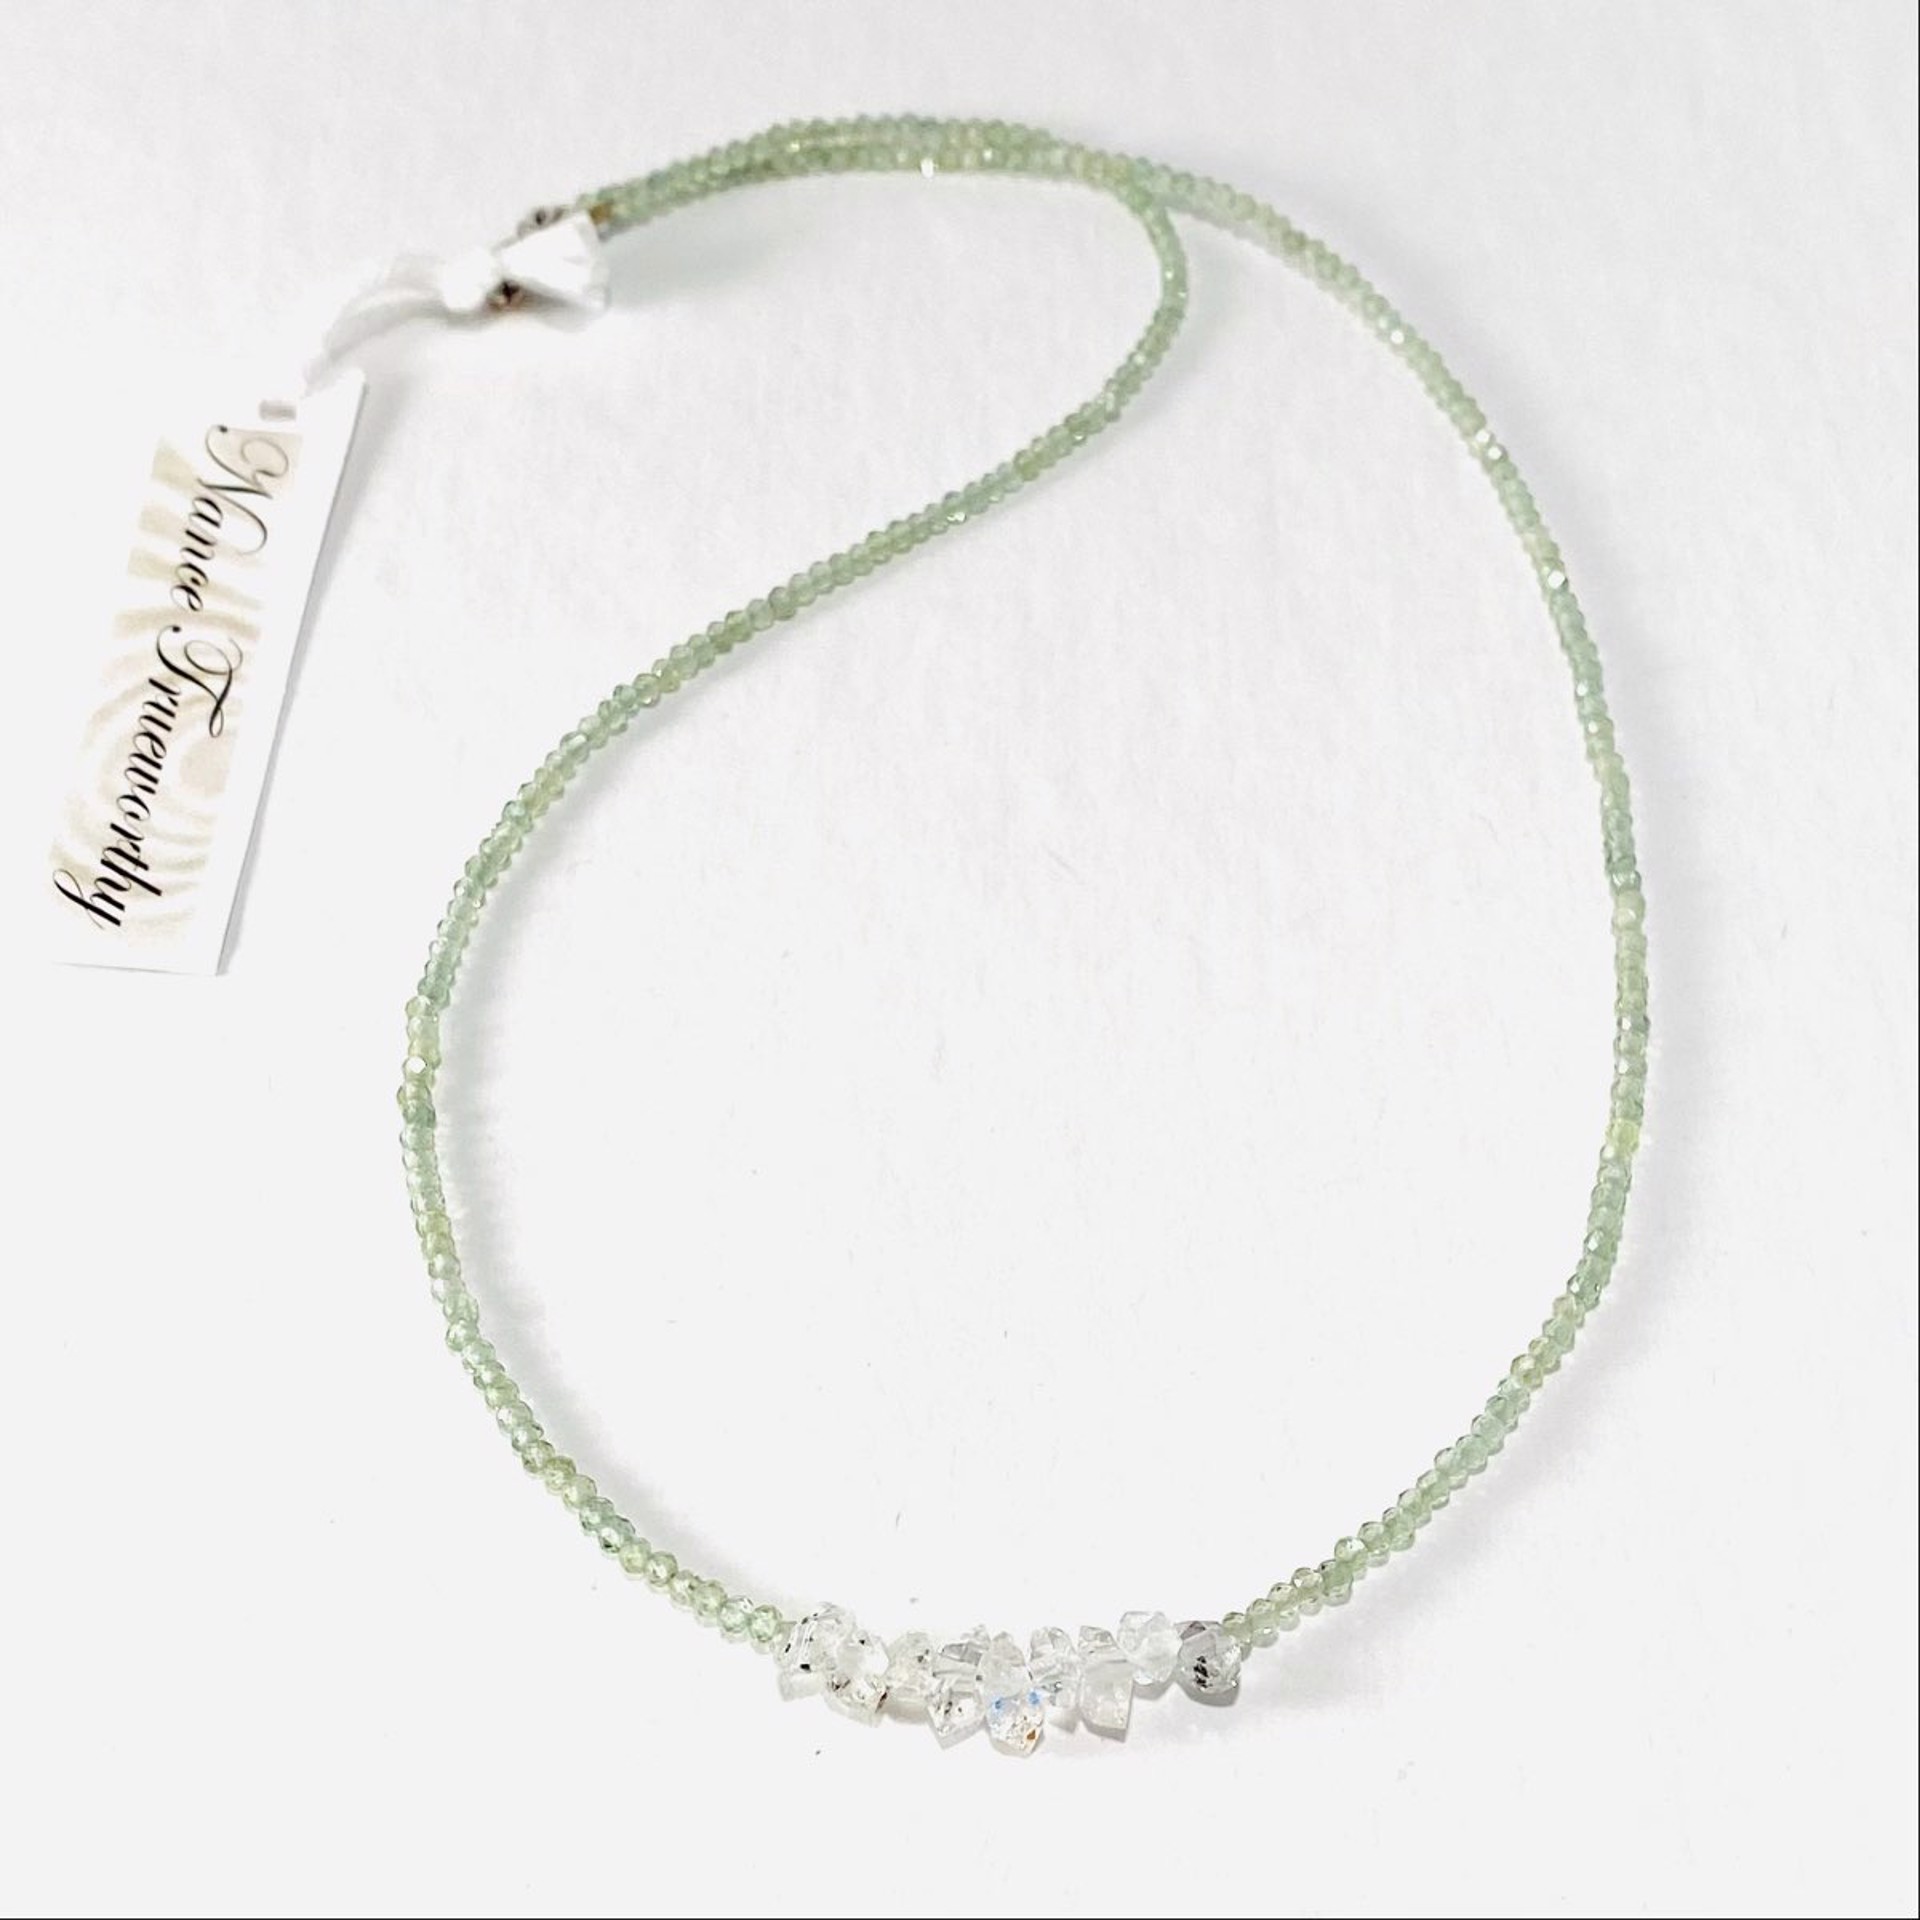 NT22-240 Faceted Tiny Prehnite Herkimer Diamond Focal Necklace by Nance Trueworthy